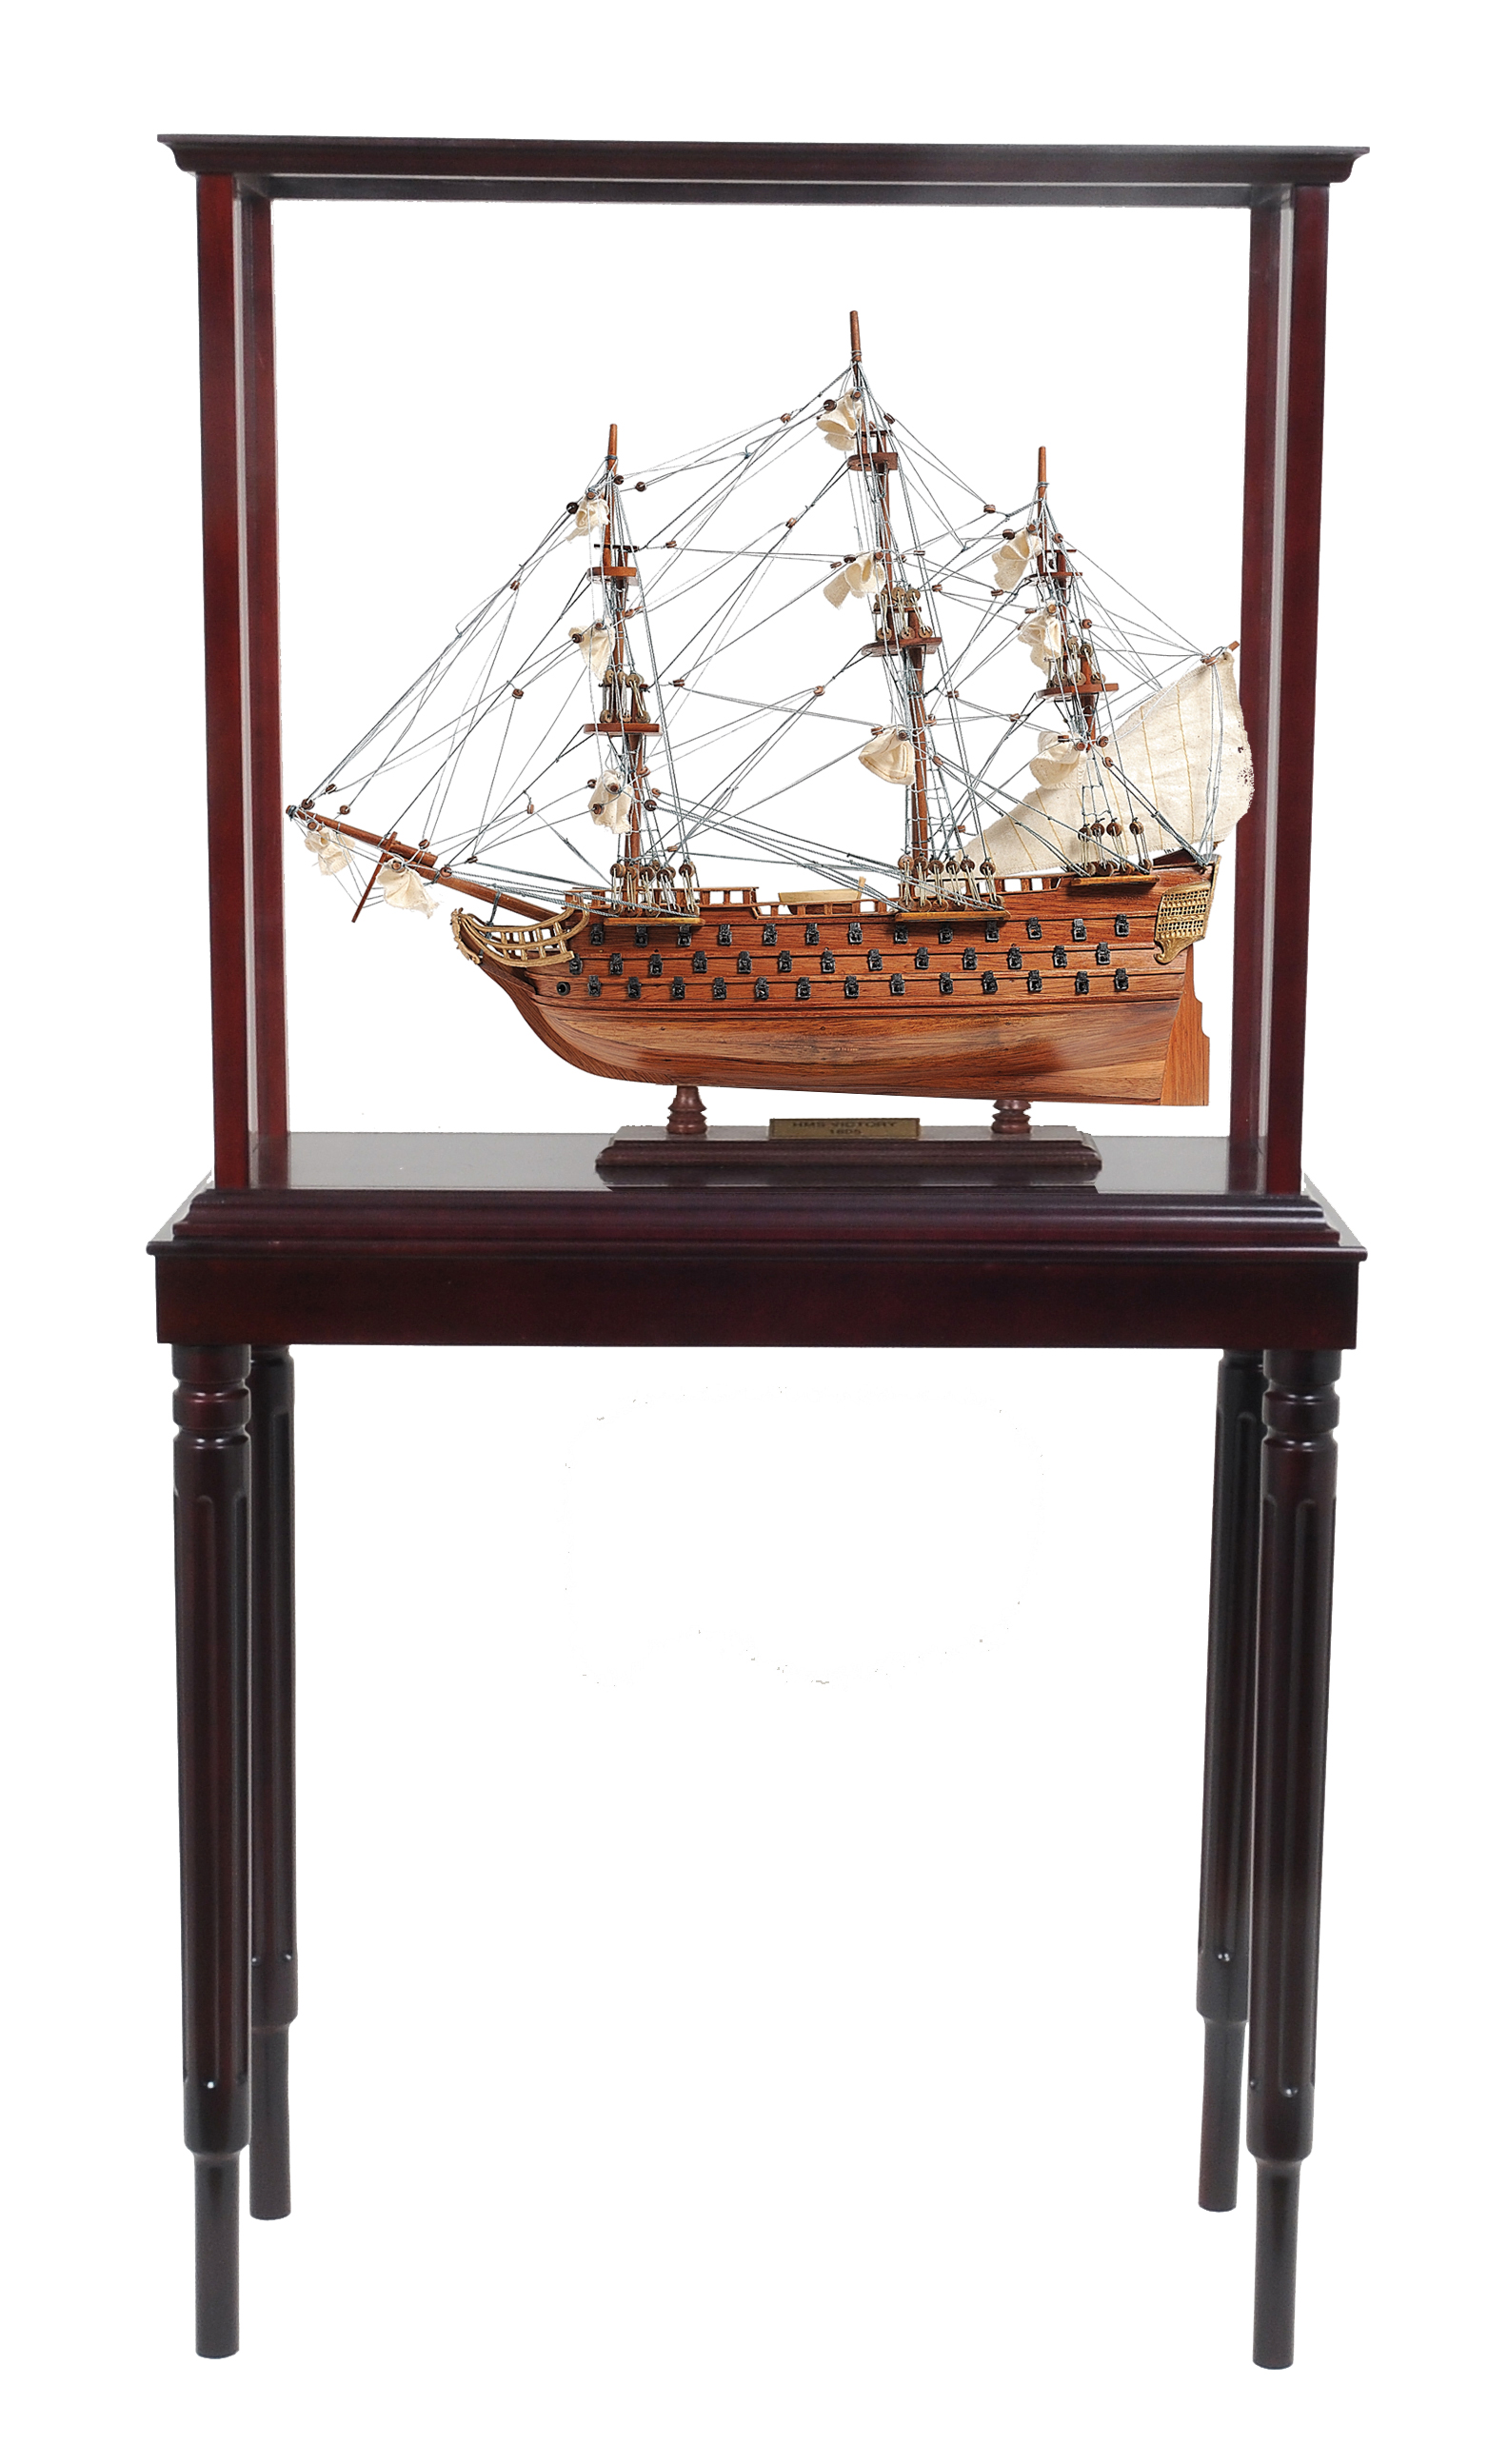 T175A HMS Victory Small with Display Case t175a-hms-victory-small-with-display-case-l01.jpg